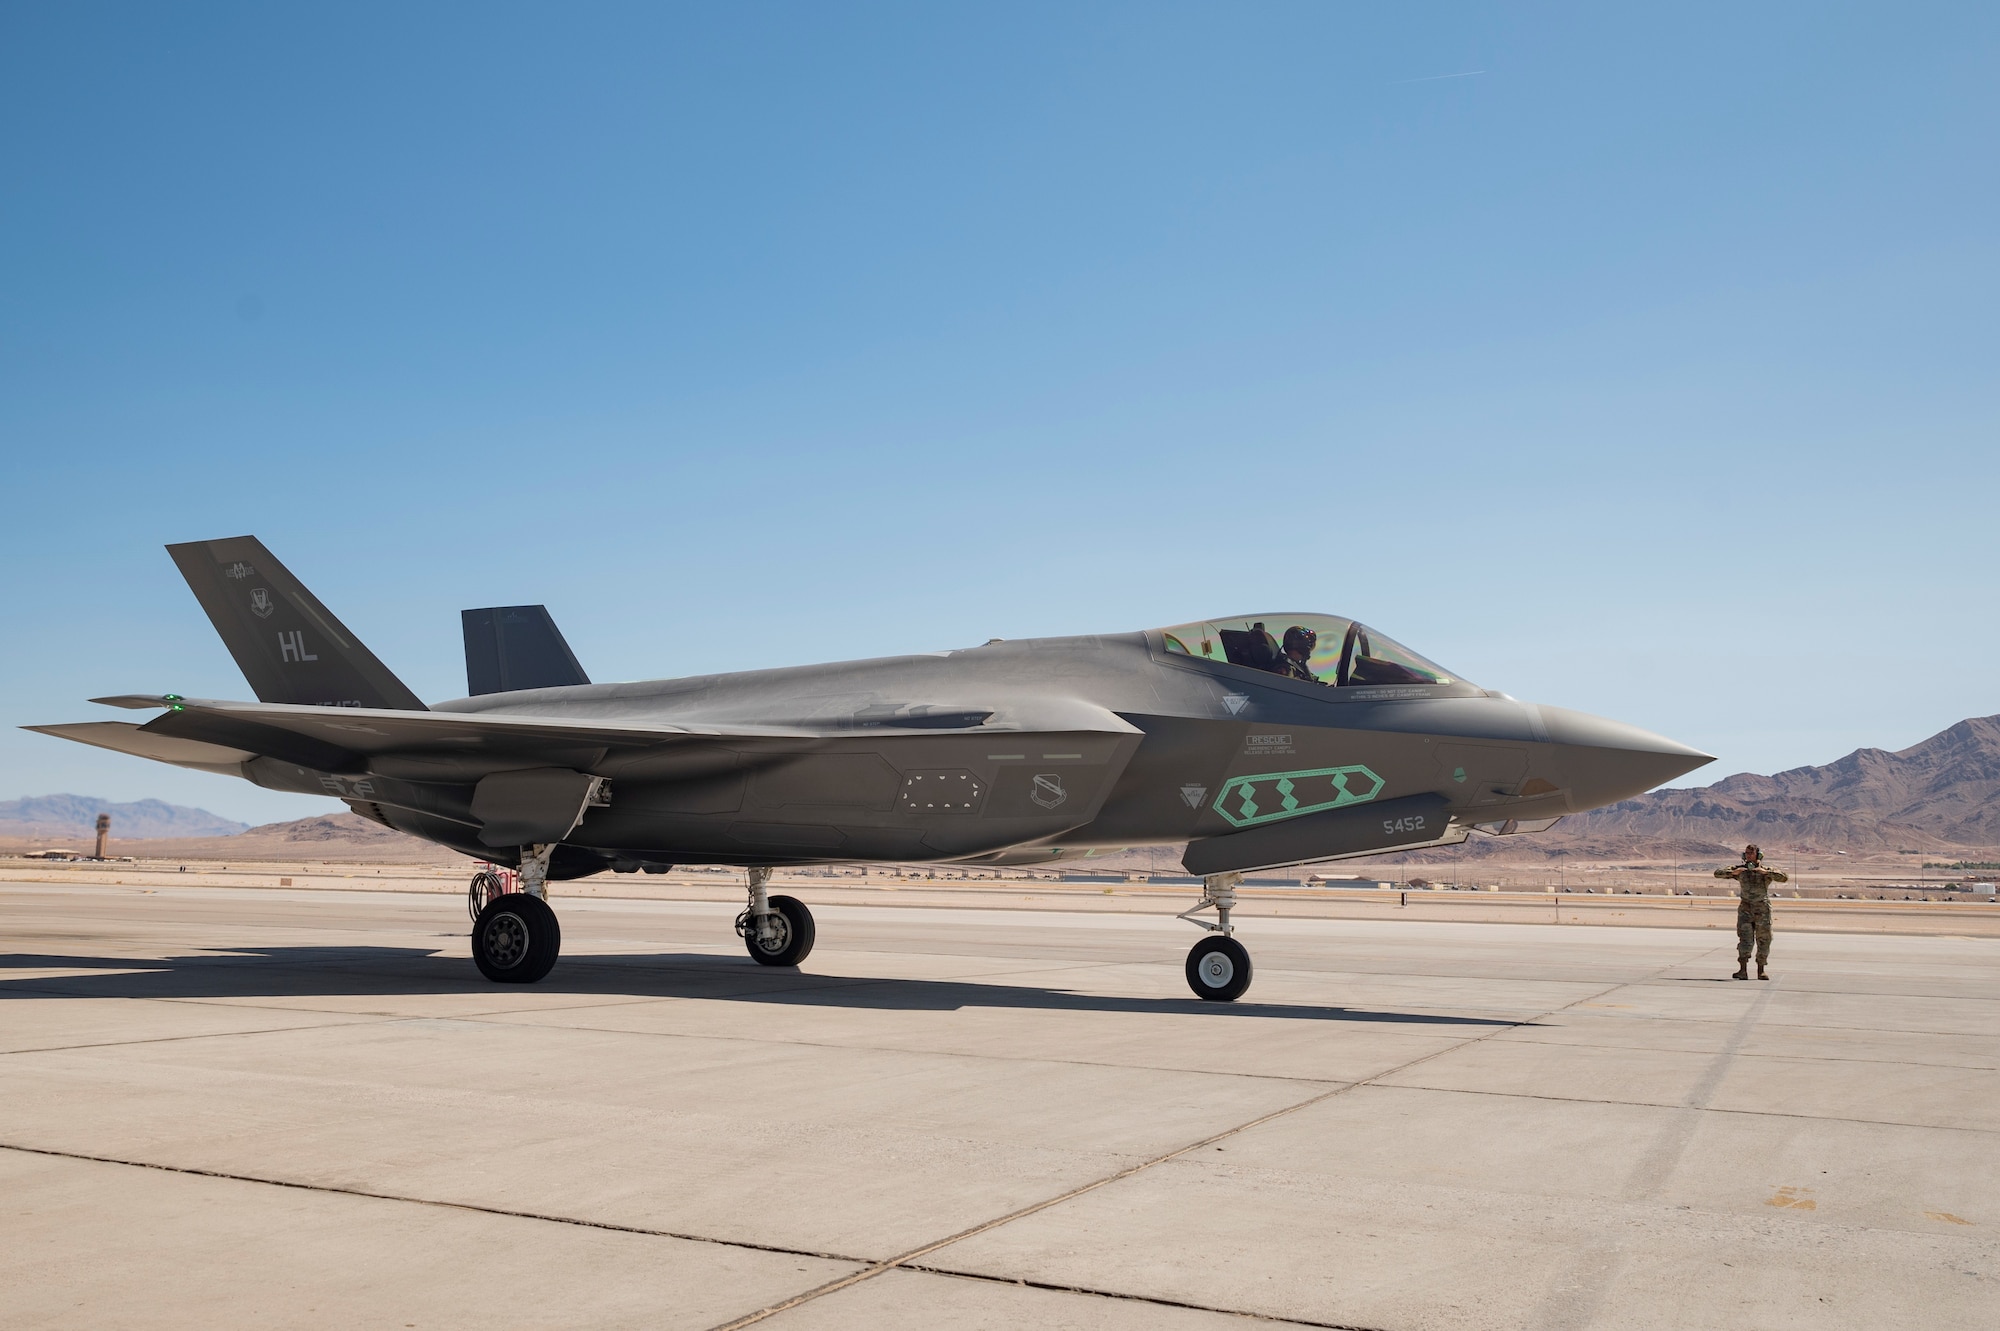 Airman 1st Class Javier Farcia-Bustos marshals an F-35A Lightning II as it taxis to complete the final test exercise of the nuclear design certification process at Nellis Air Force Base, Nevada, Sept. 21, 2021. This event included the first release of the most representative B61-12 test asset from an operationally representative F-35A, resulting in the B61-12 becoming the first F-35 weapon to complete development and intrgration during the aircraft’s modernization phase. (U.S. Air Force photo by Airman 1st Class Zachary Rufus)